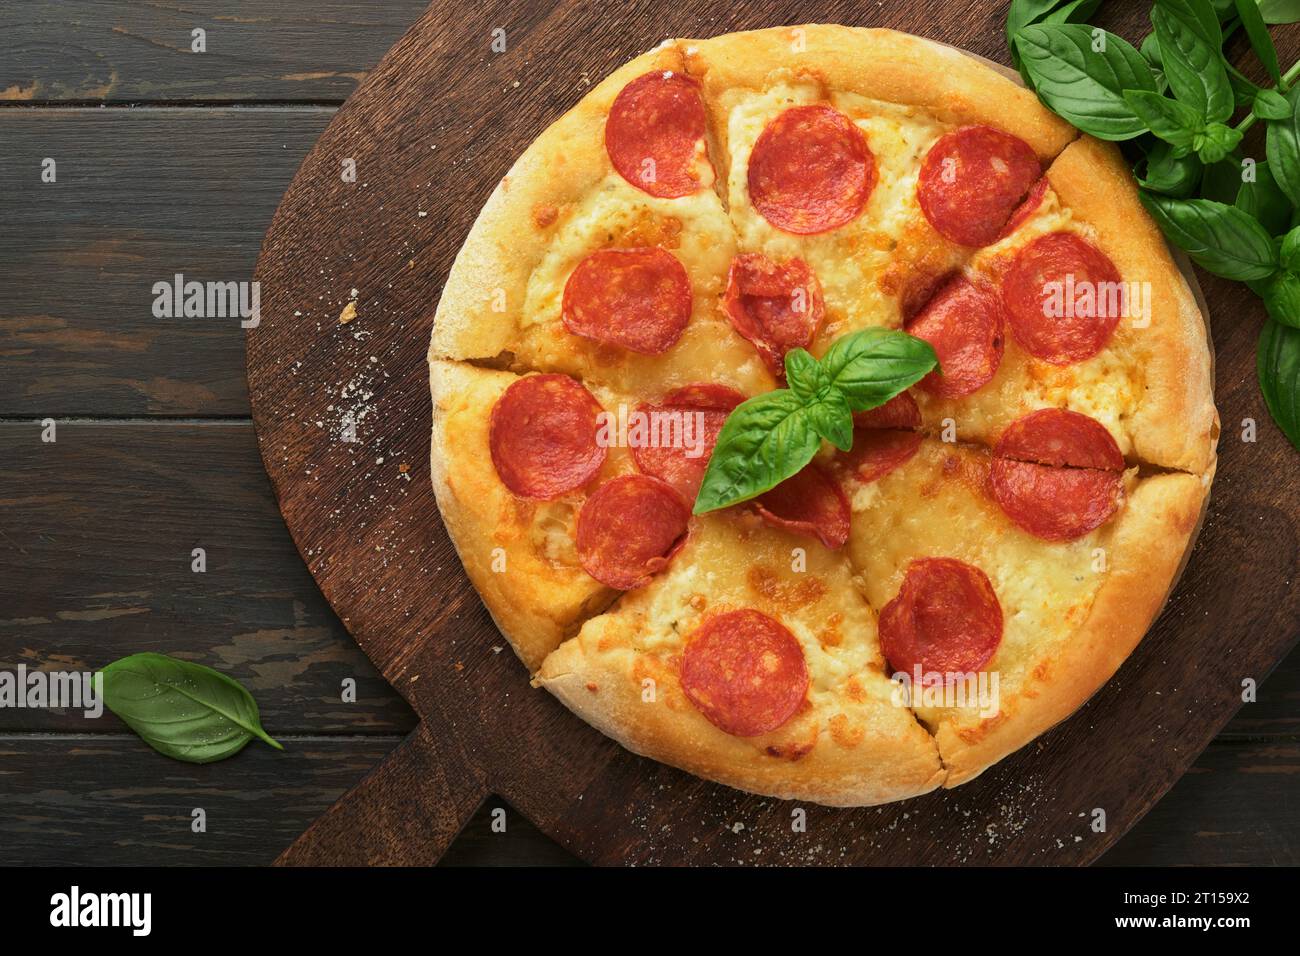 Pepperoni pizza. Traditional pepperoni pizza and cooking ingredients tomatoes basil on wooden table backgrounds. Italian Traditional food. Top view. M Stock Photo